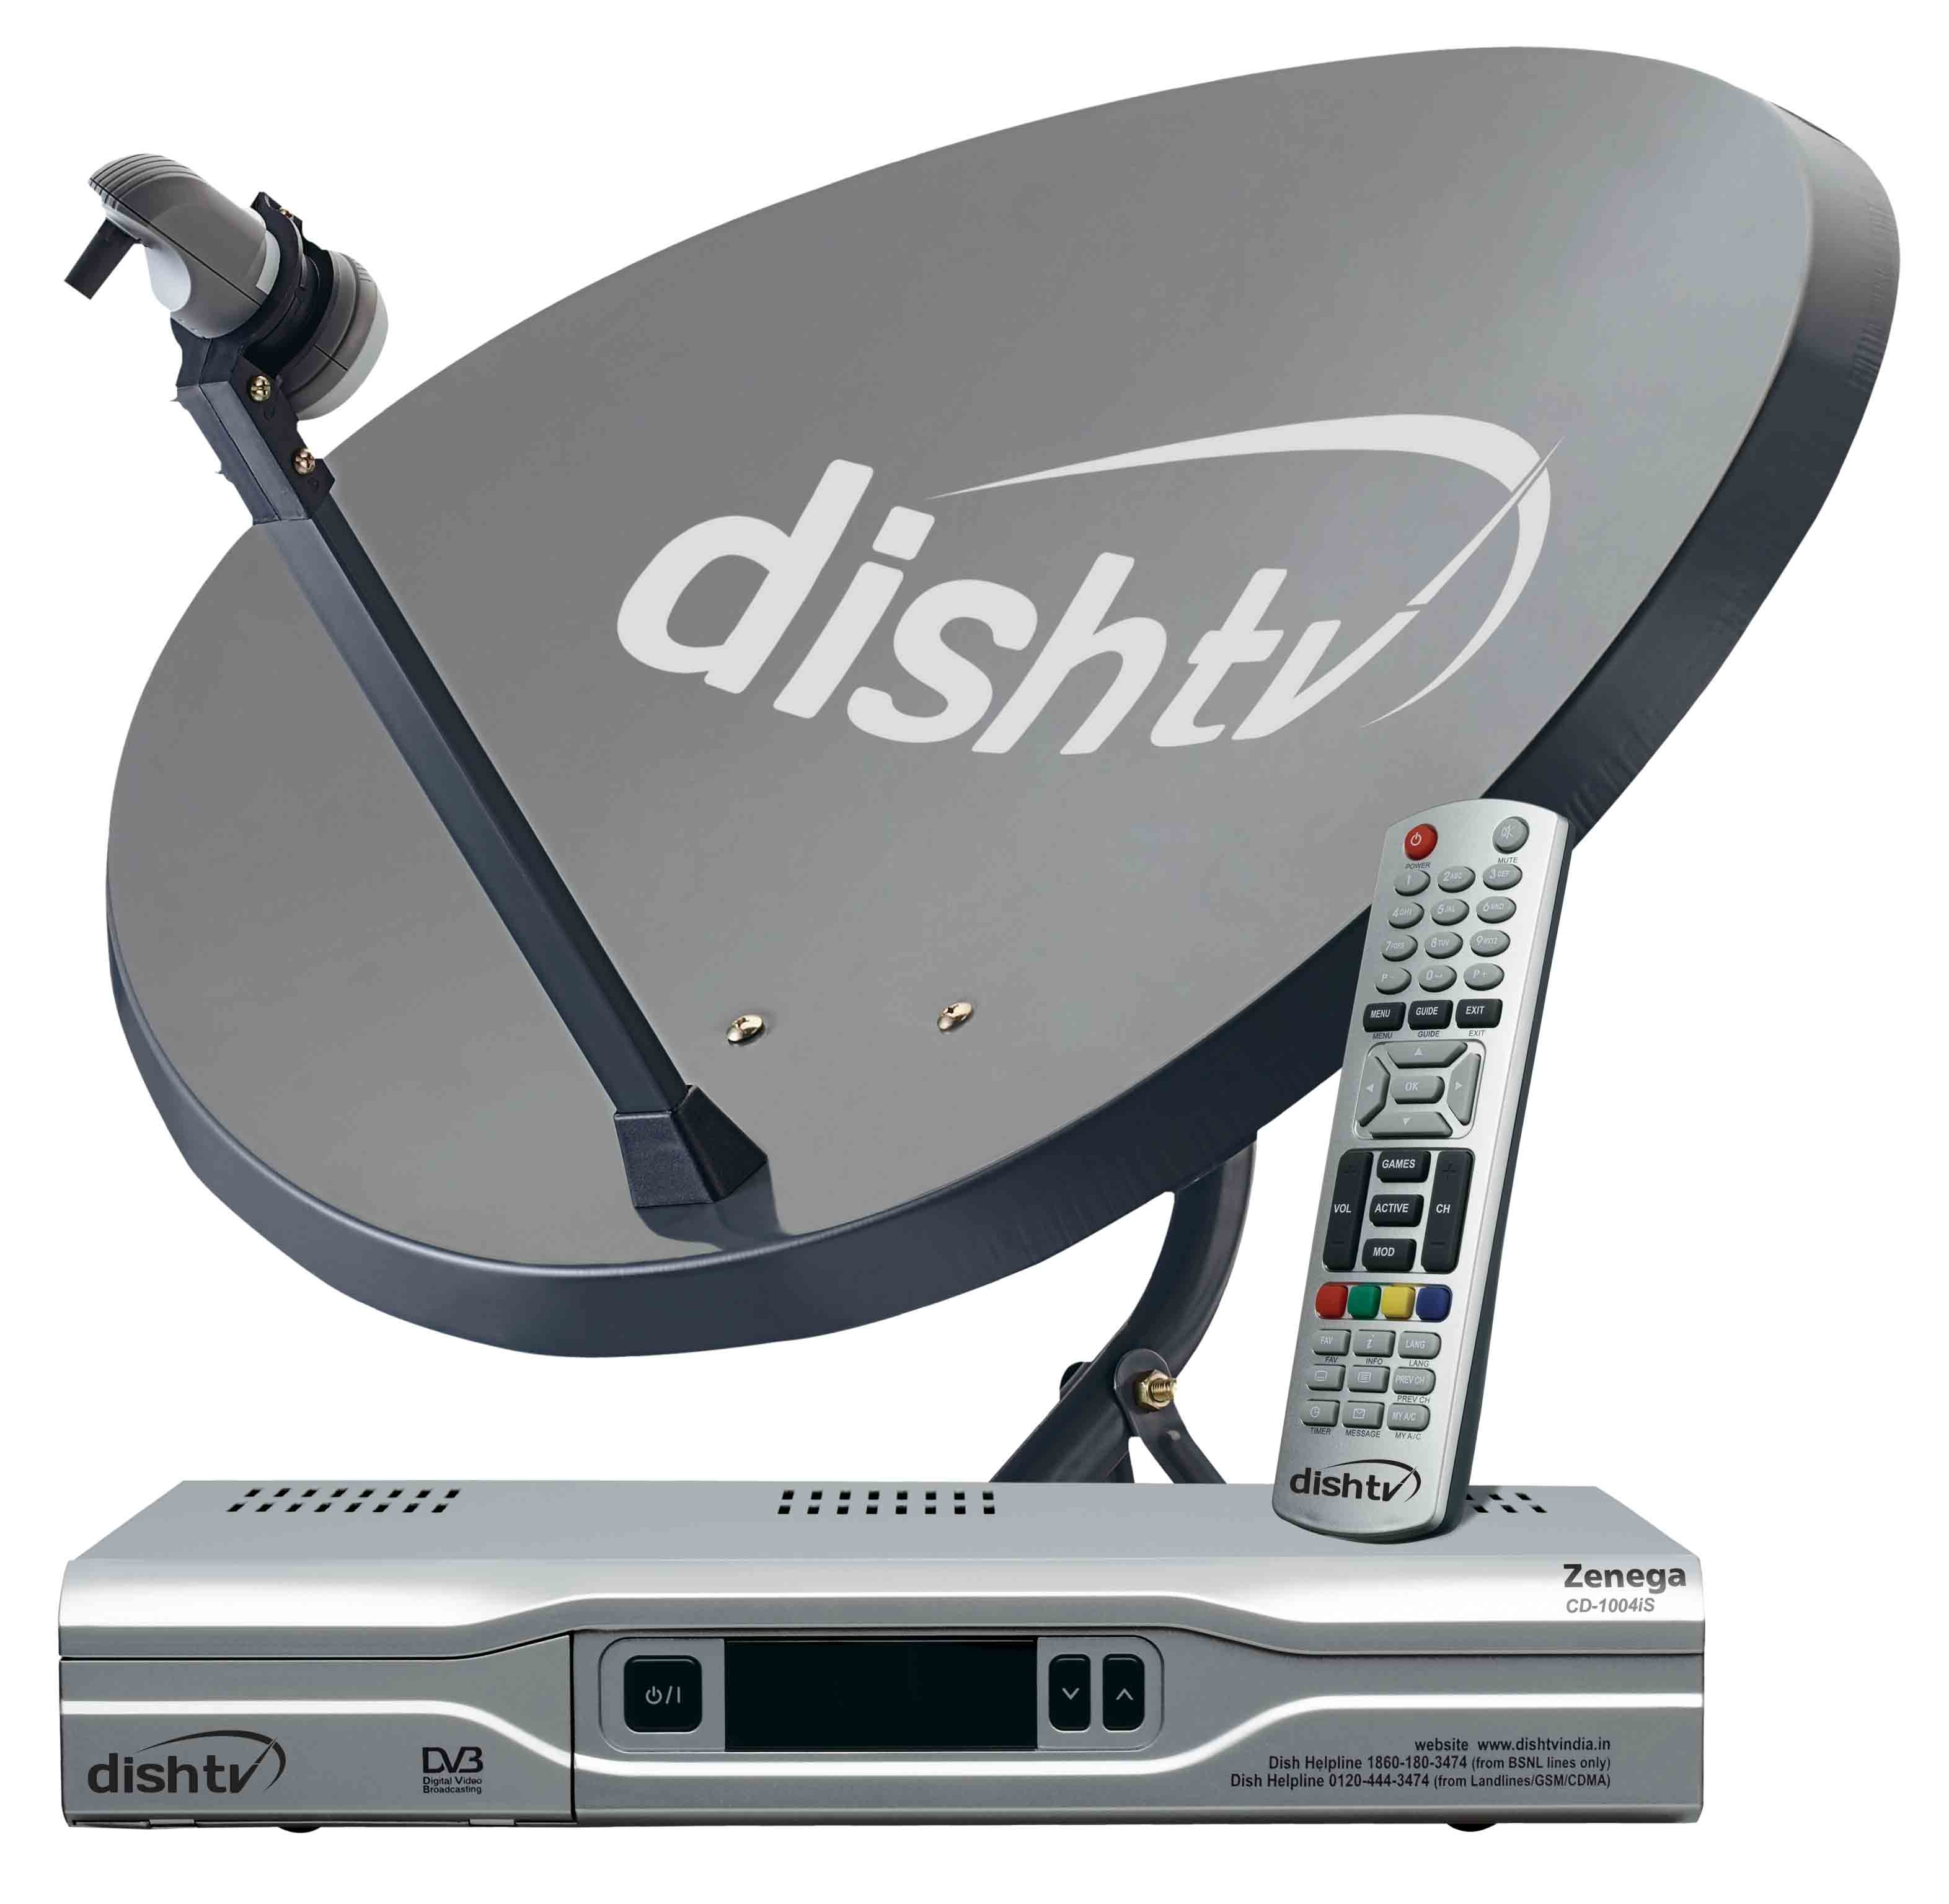 0 Dish TV Coupons & Offers Verified 6 minutes ago